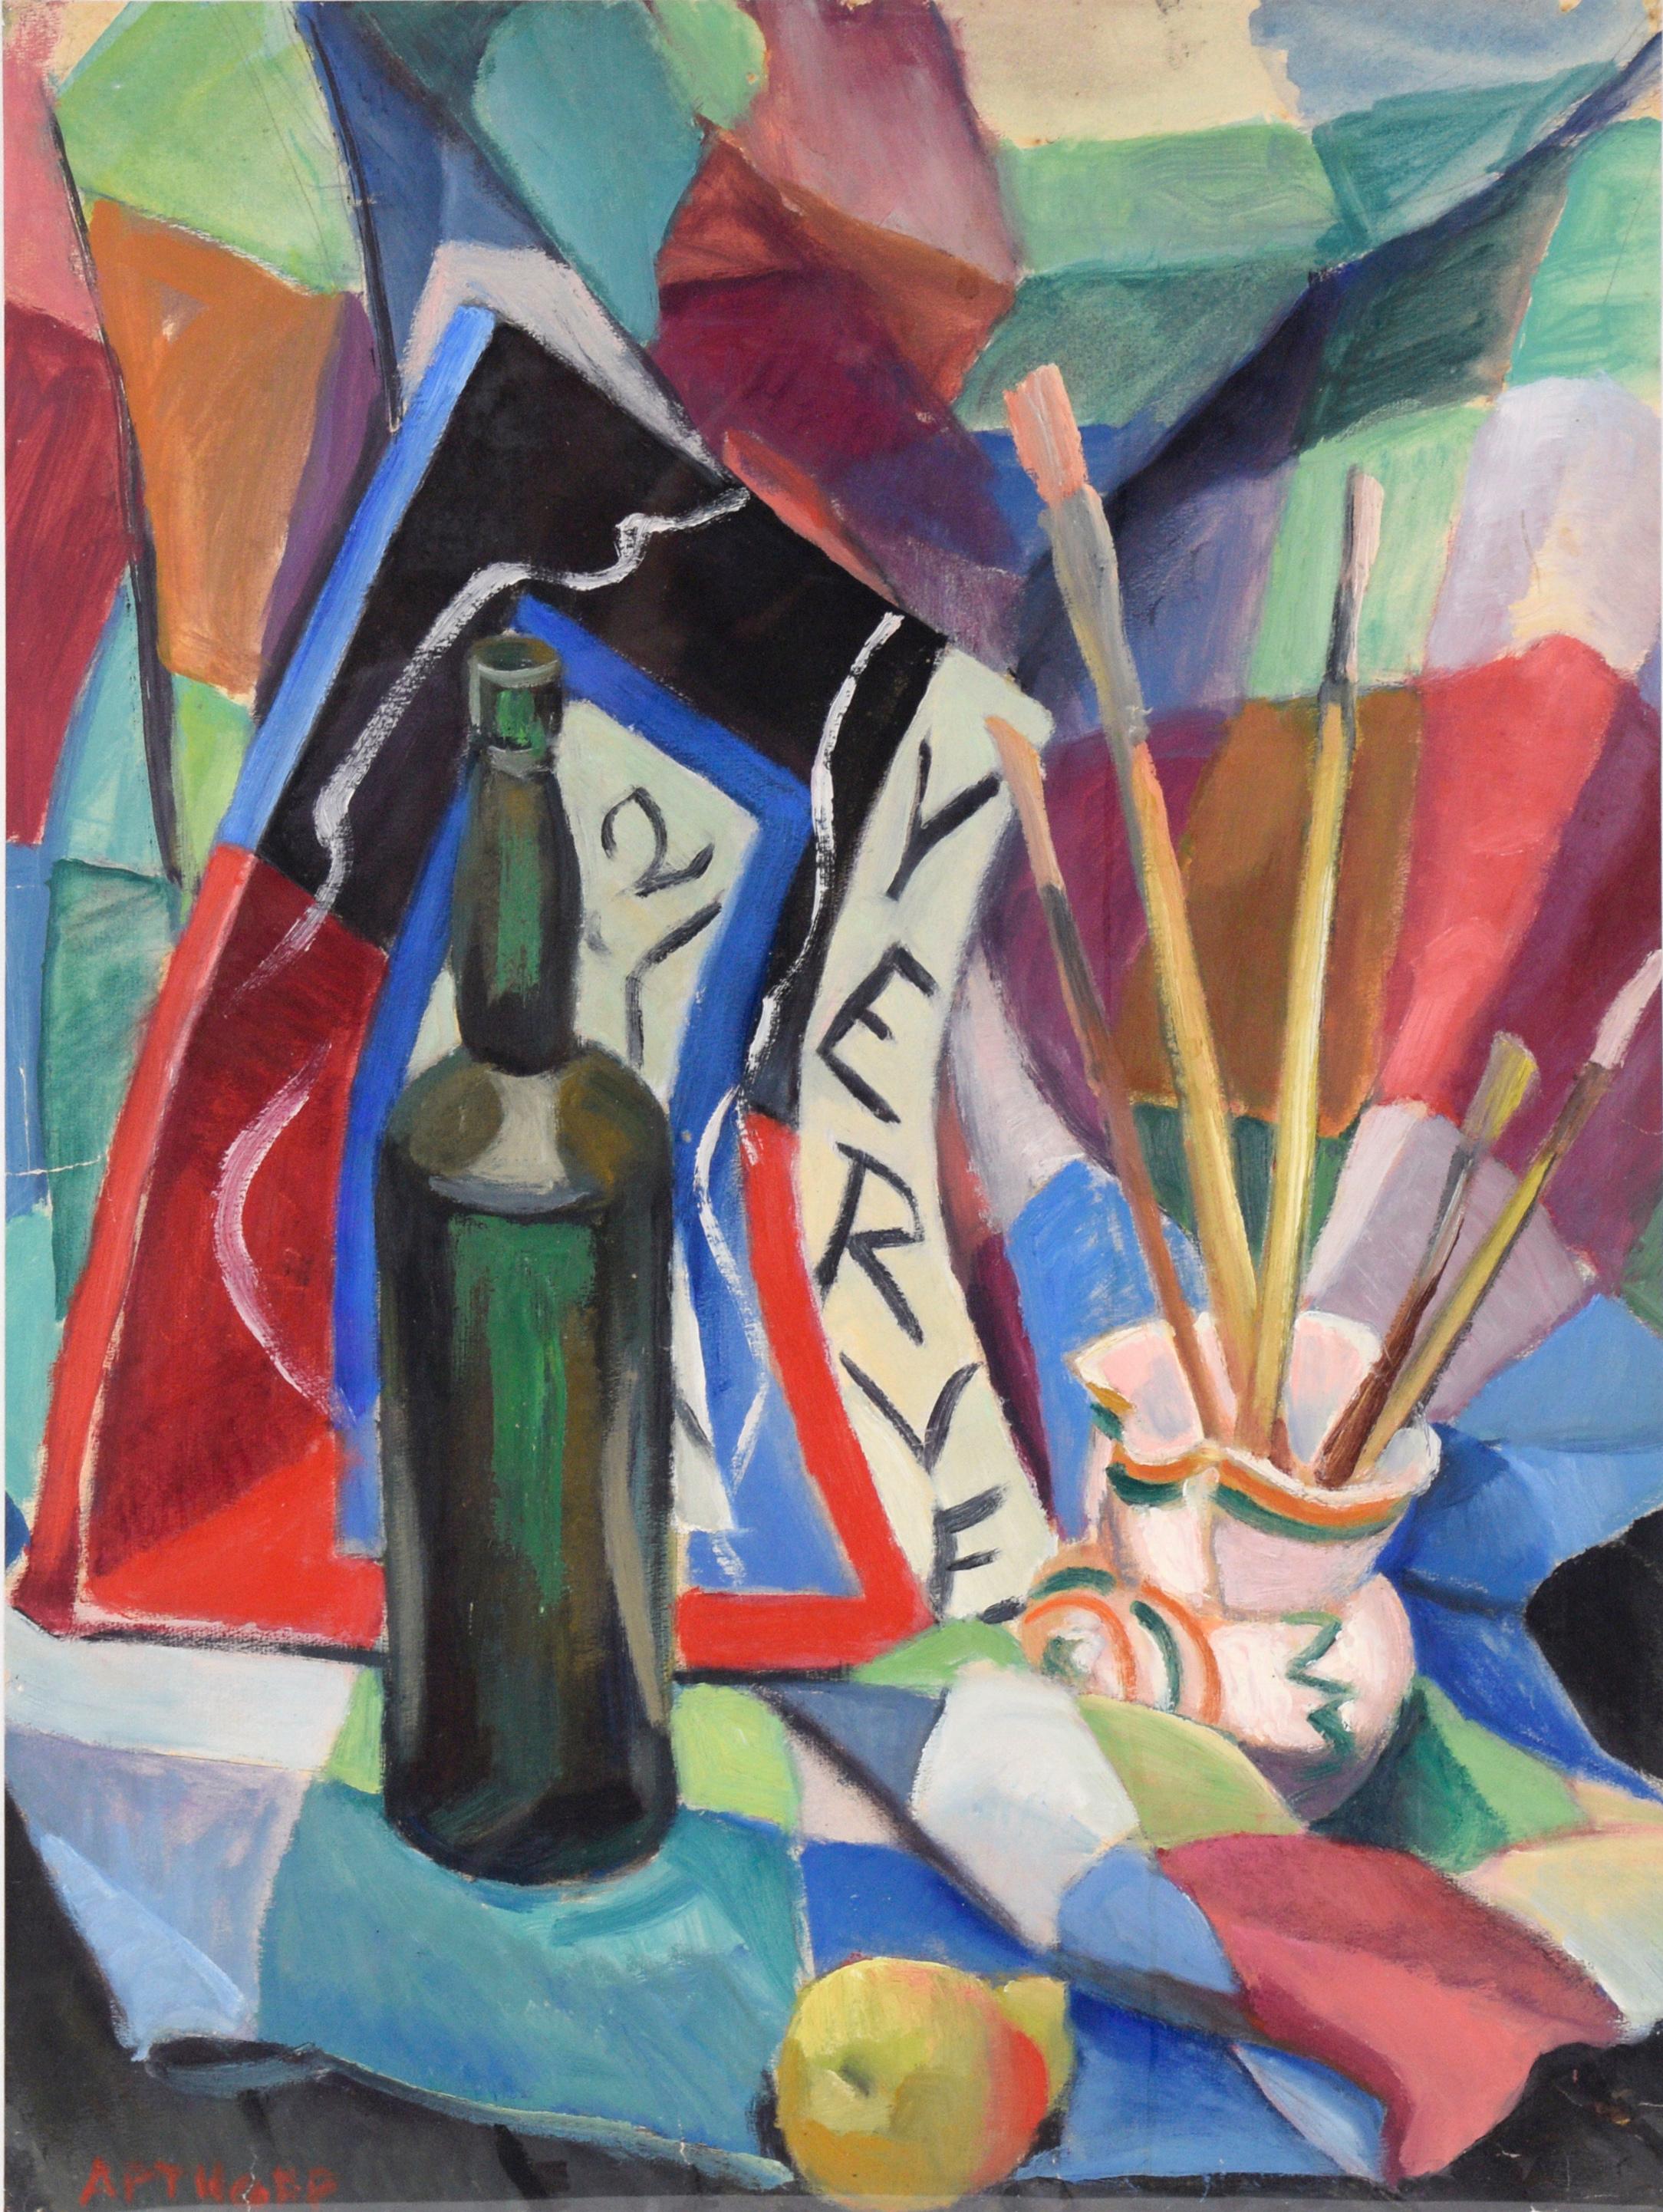 Still Life with Bottle, Paintbrushes, and Book in Oil on Paper - Painting by Louise Apthorp